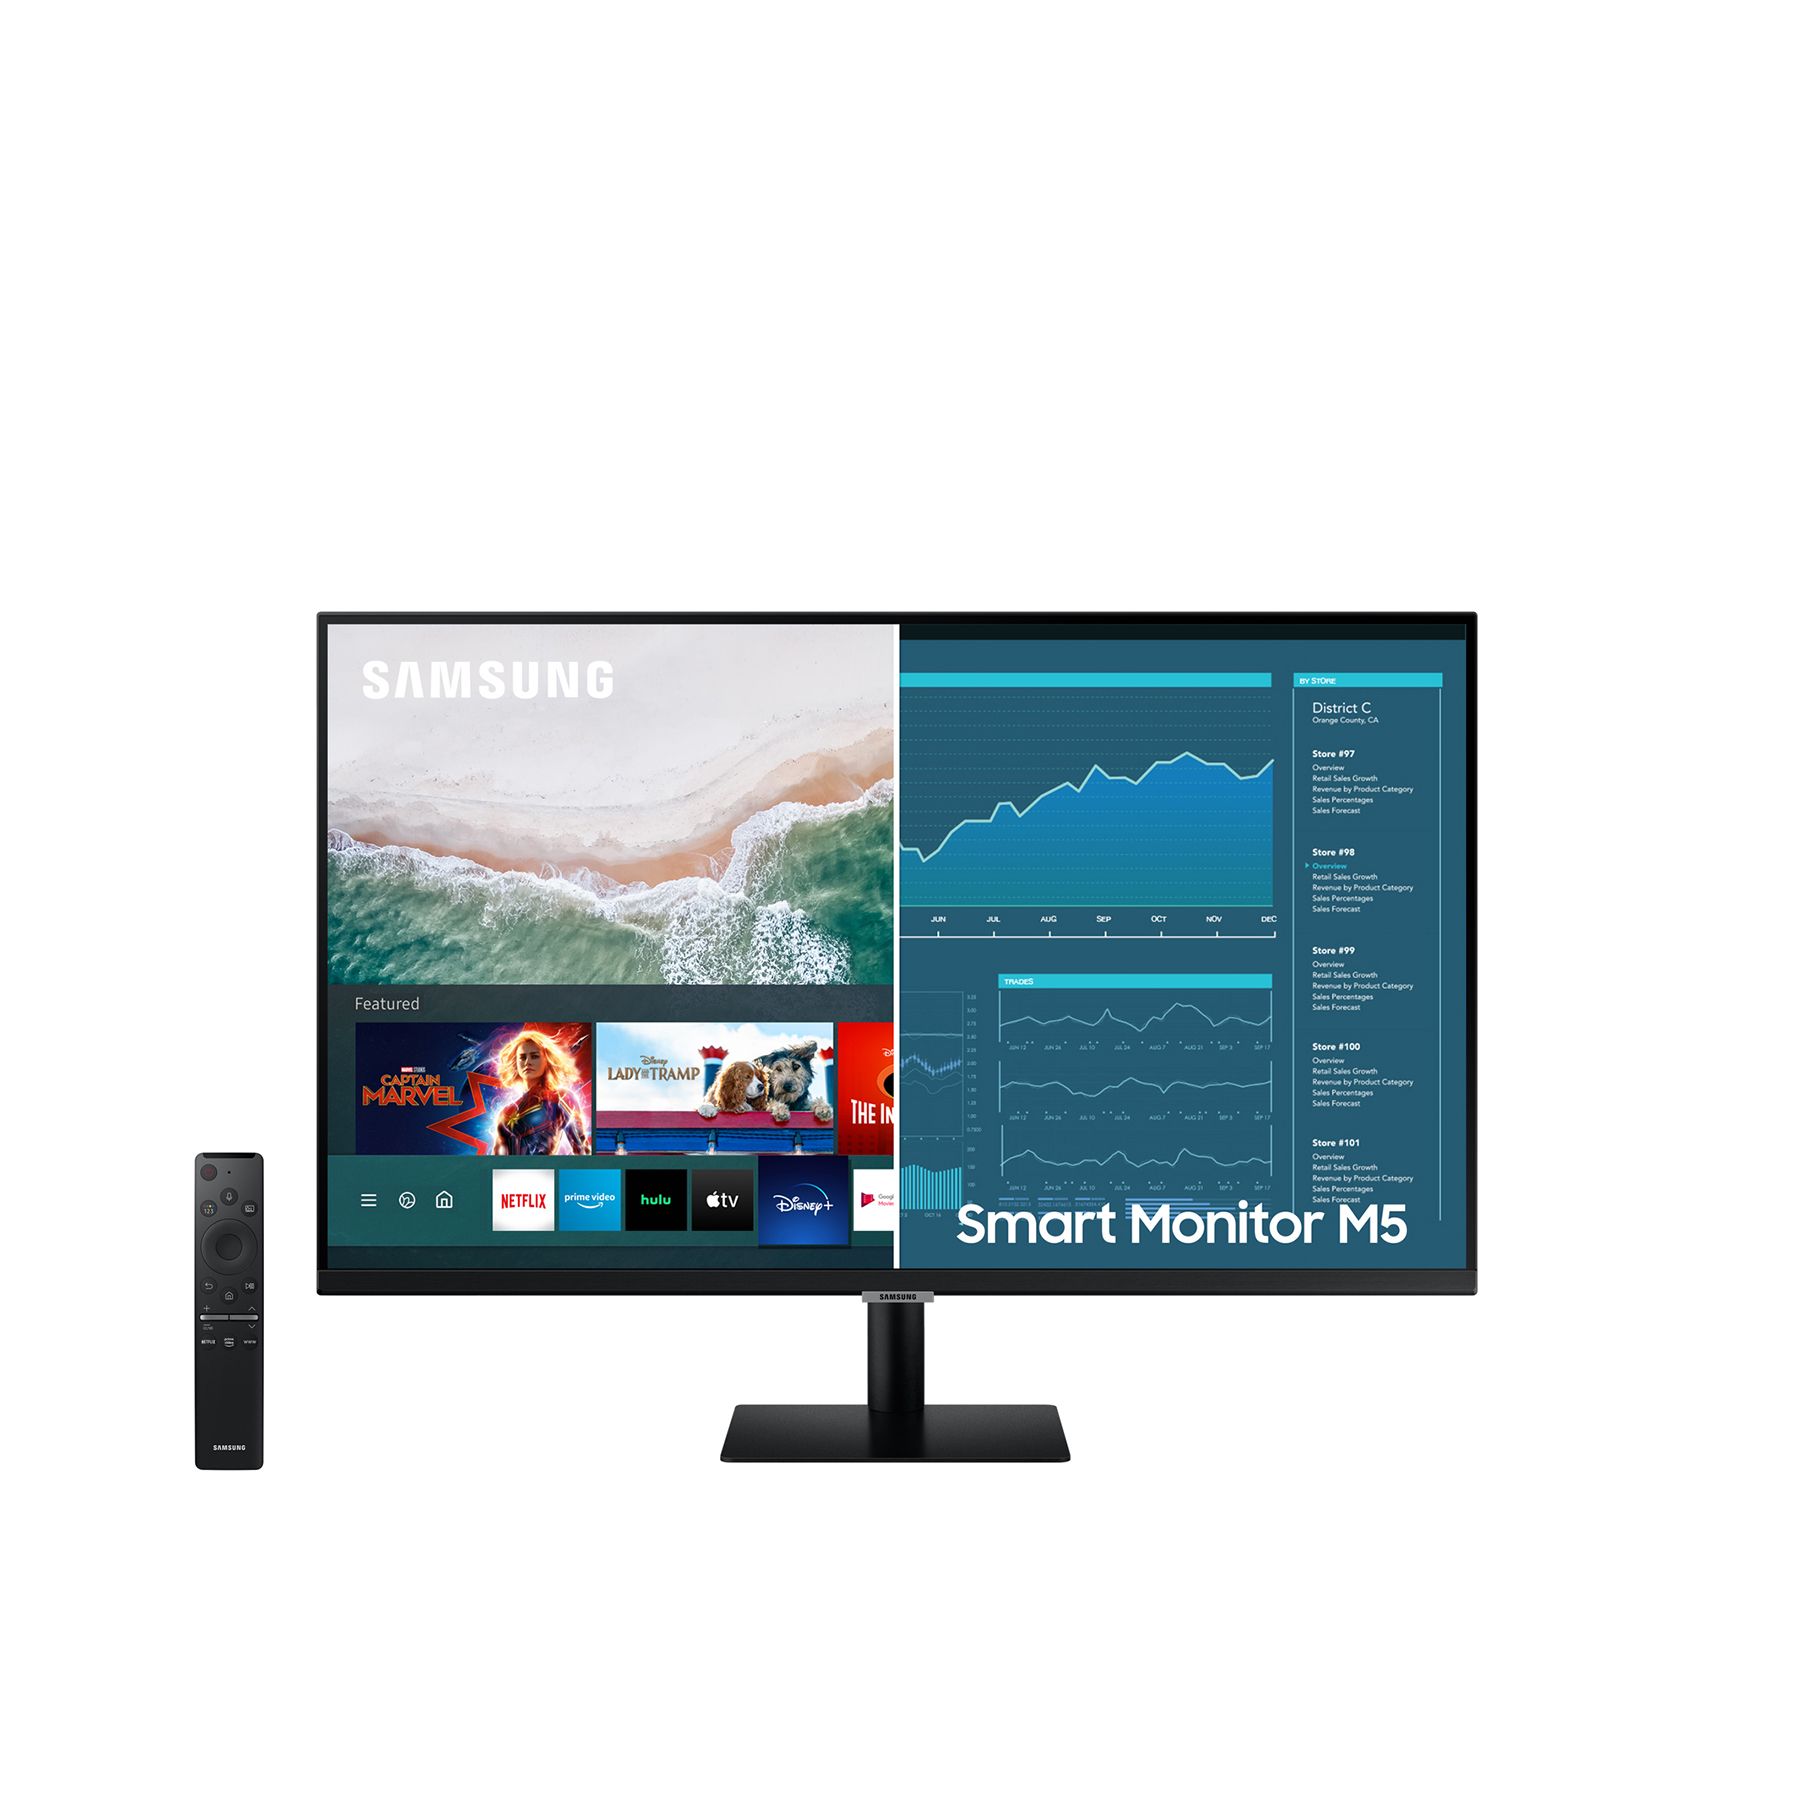 Samsung M7 32 Smart Monitor Review  The Last Monitor You'll Buy!!! 